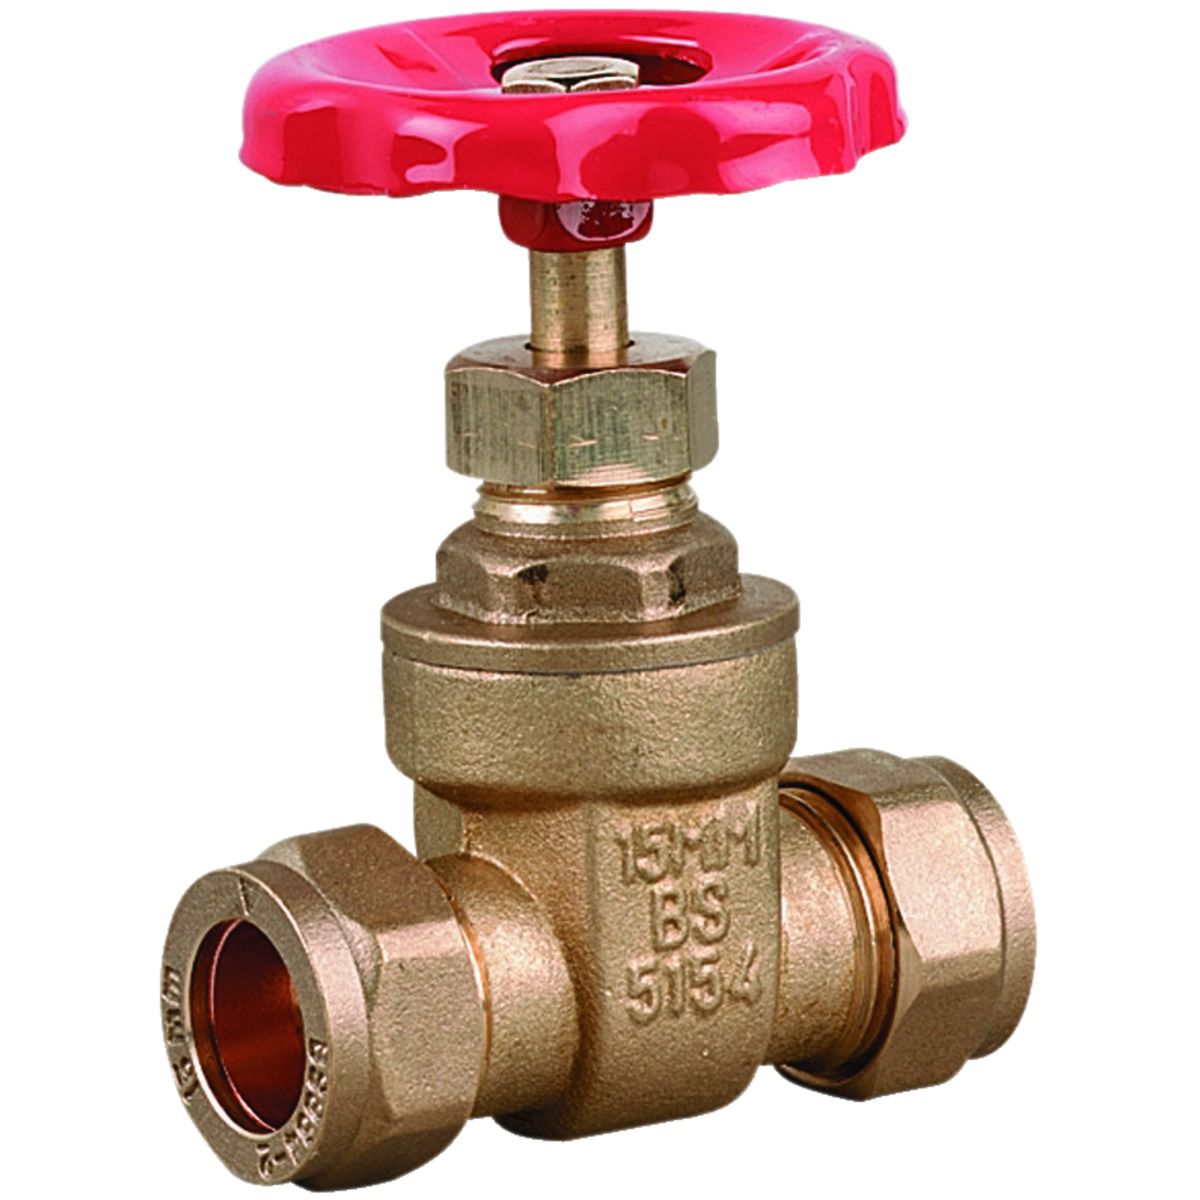 Image of Primaflow Brass Fullway Compression Gate Valve - 15mm